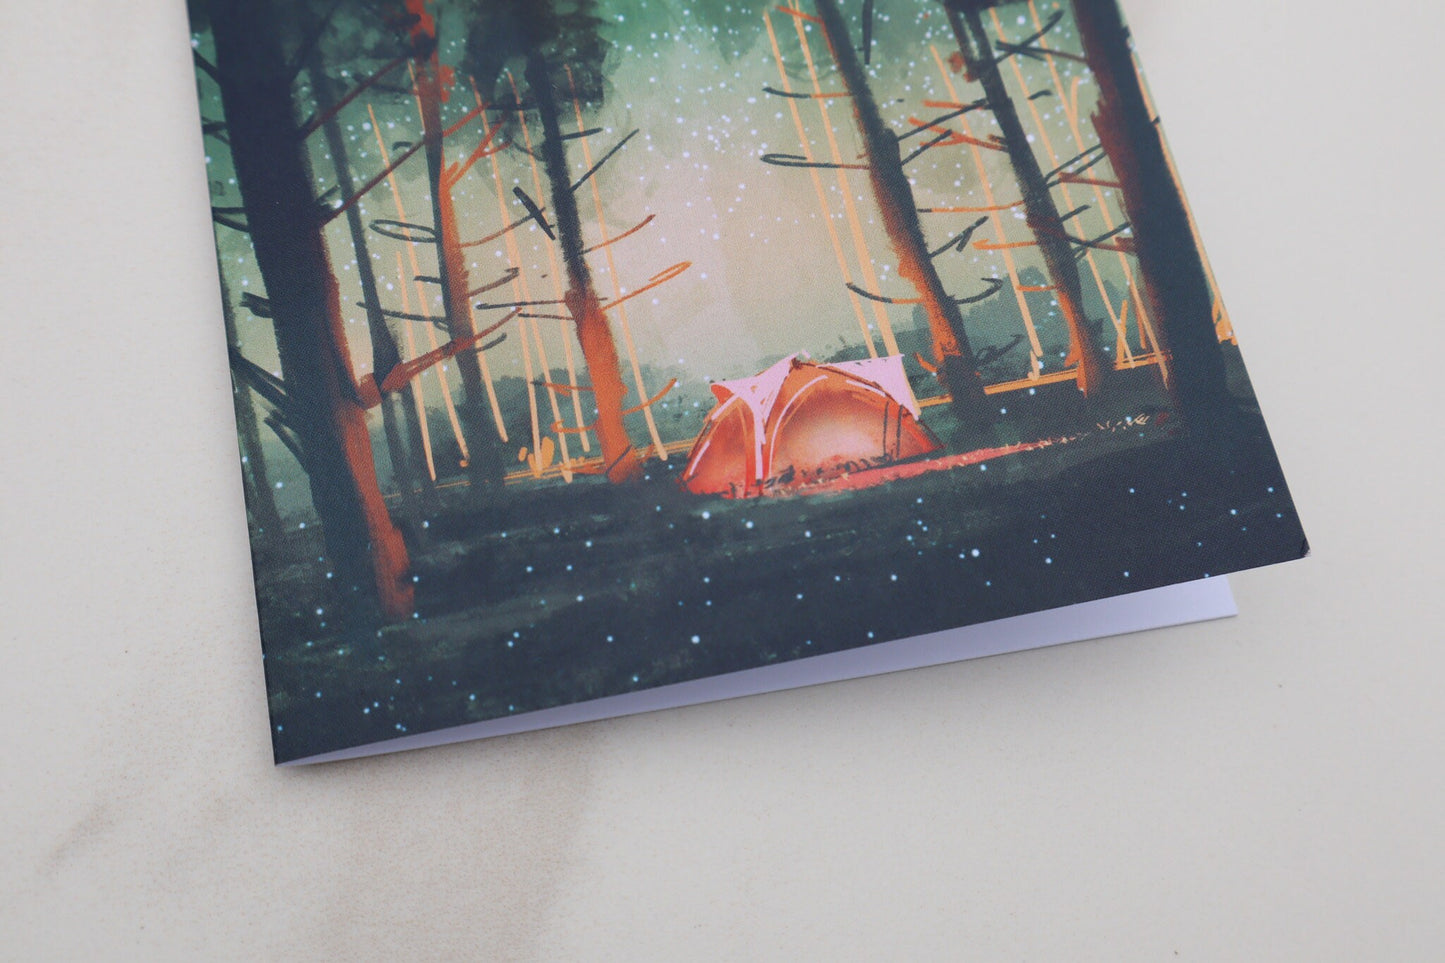 In-Tents Camping Birthday Card